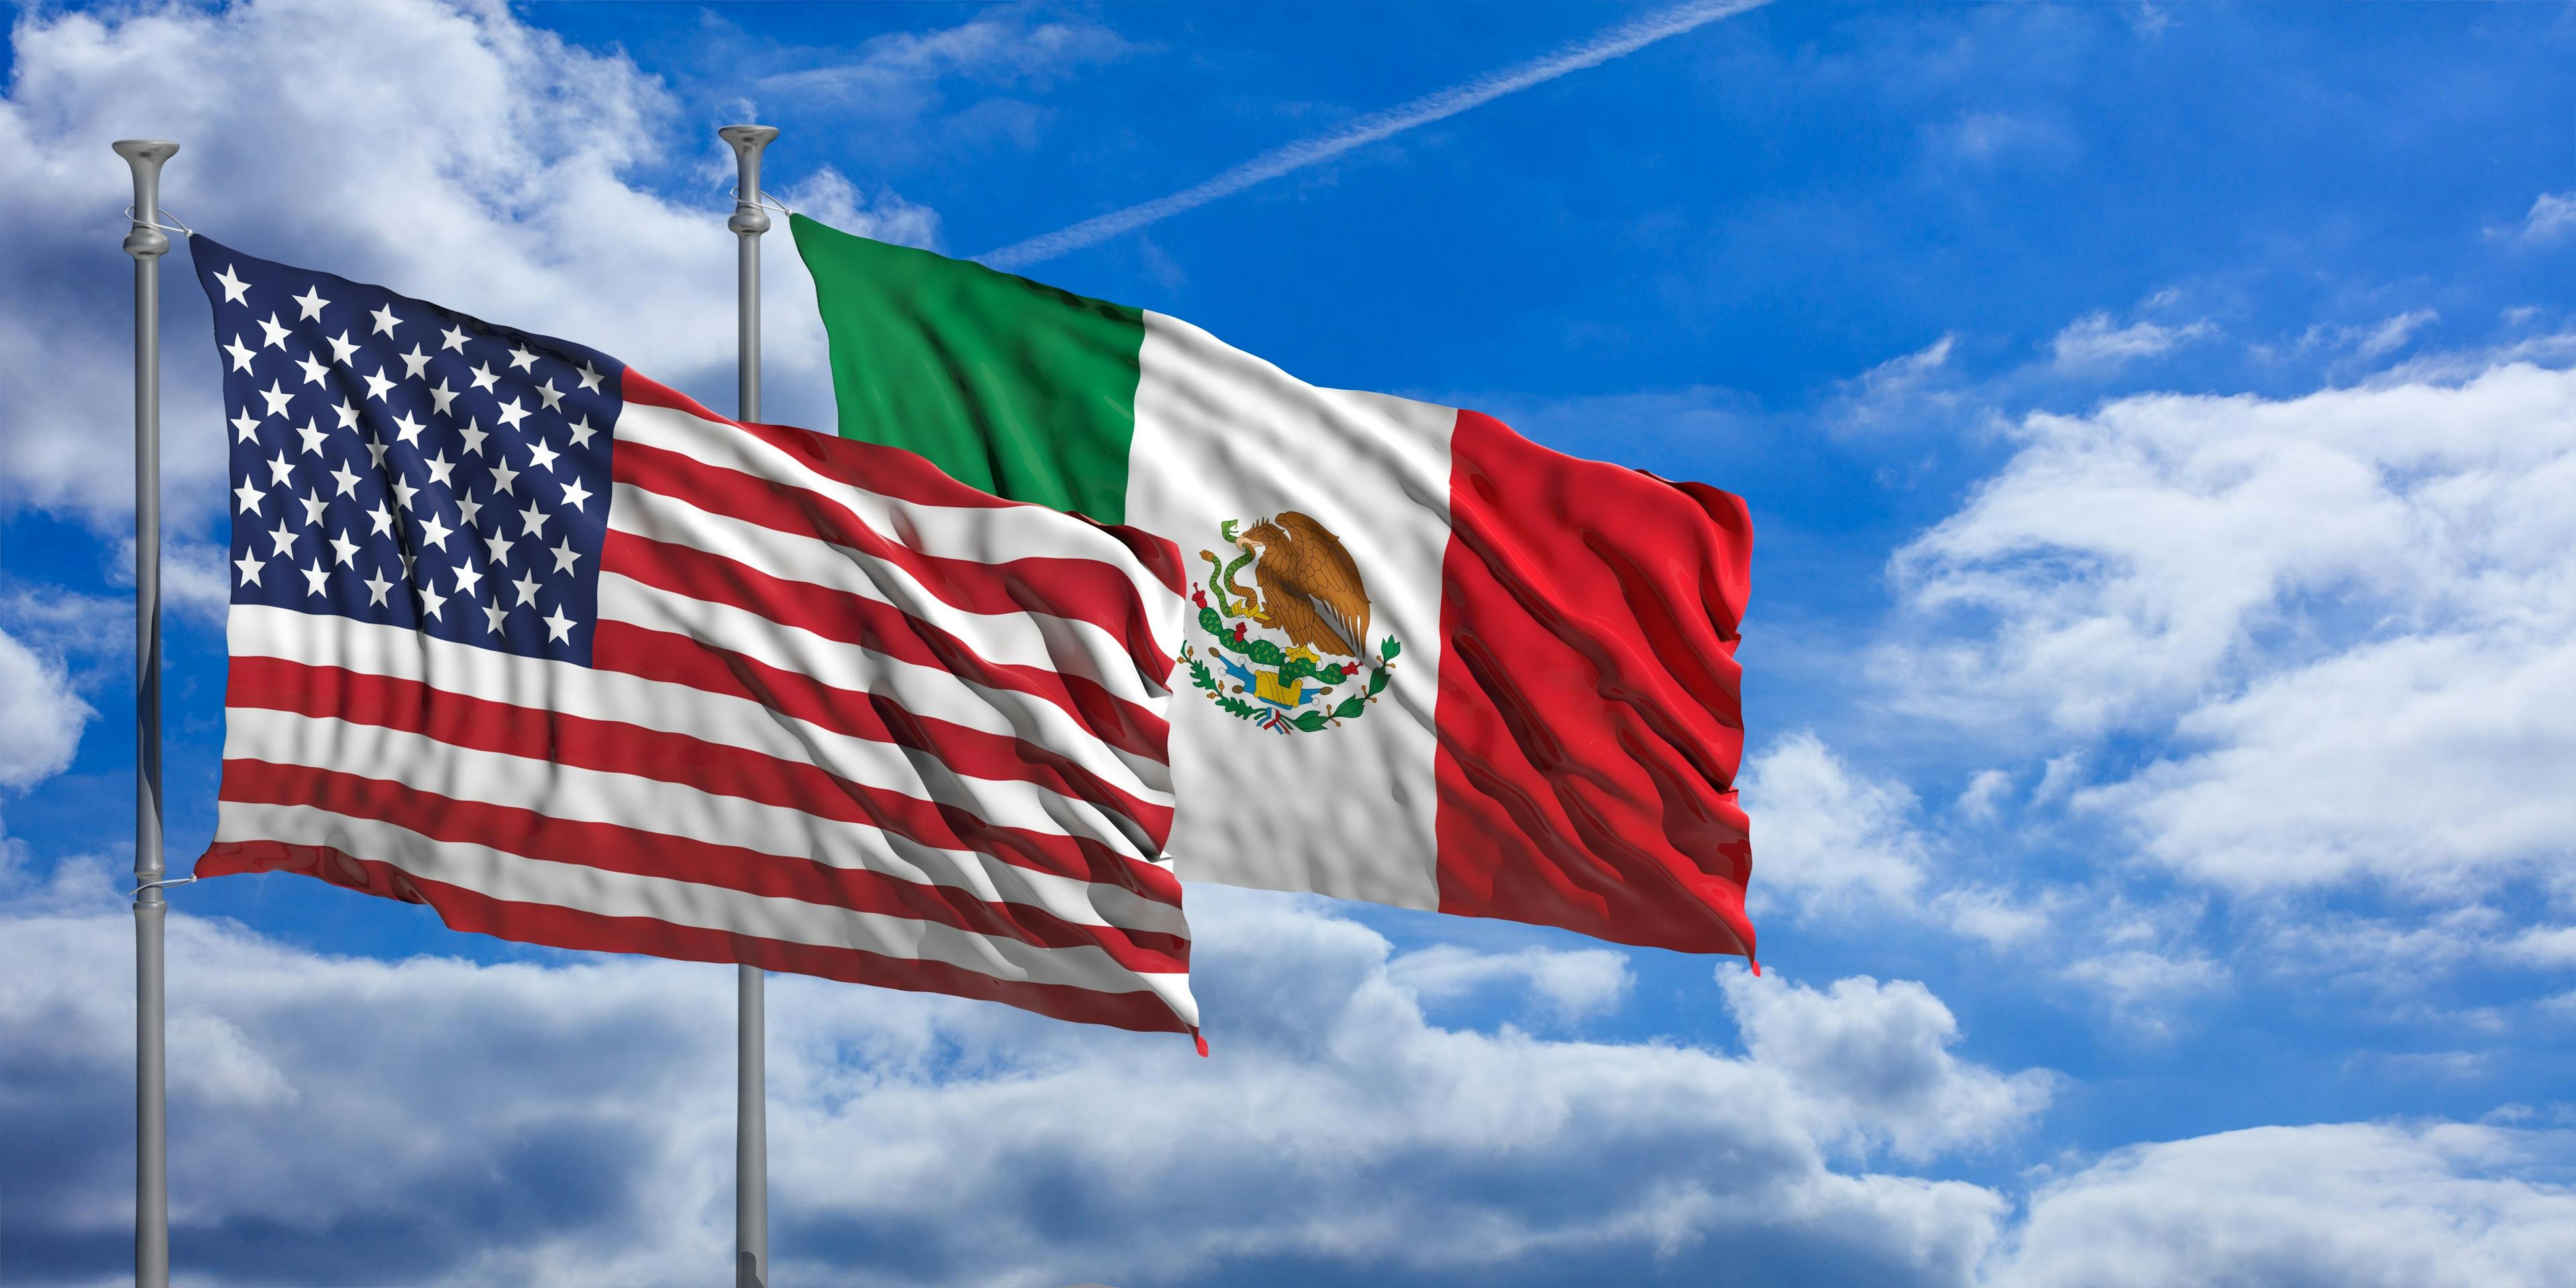 US and Mexico flags | Image Credit: Rawf8 – stock.adobe.com